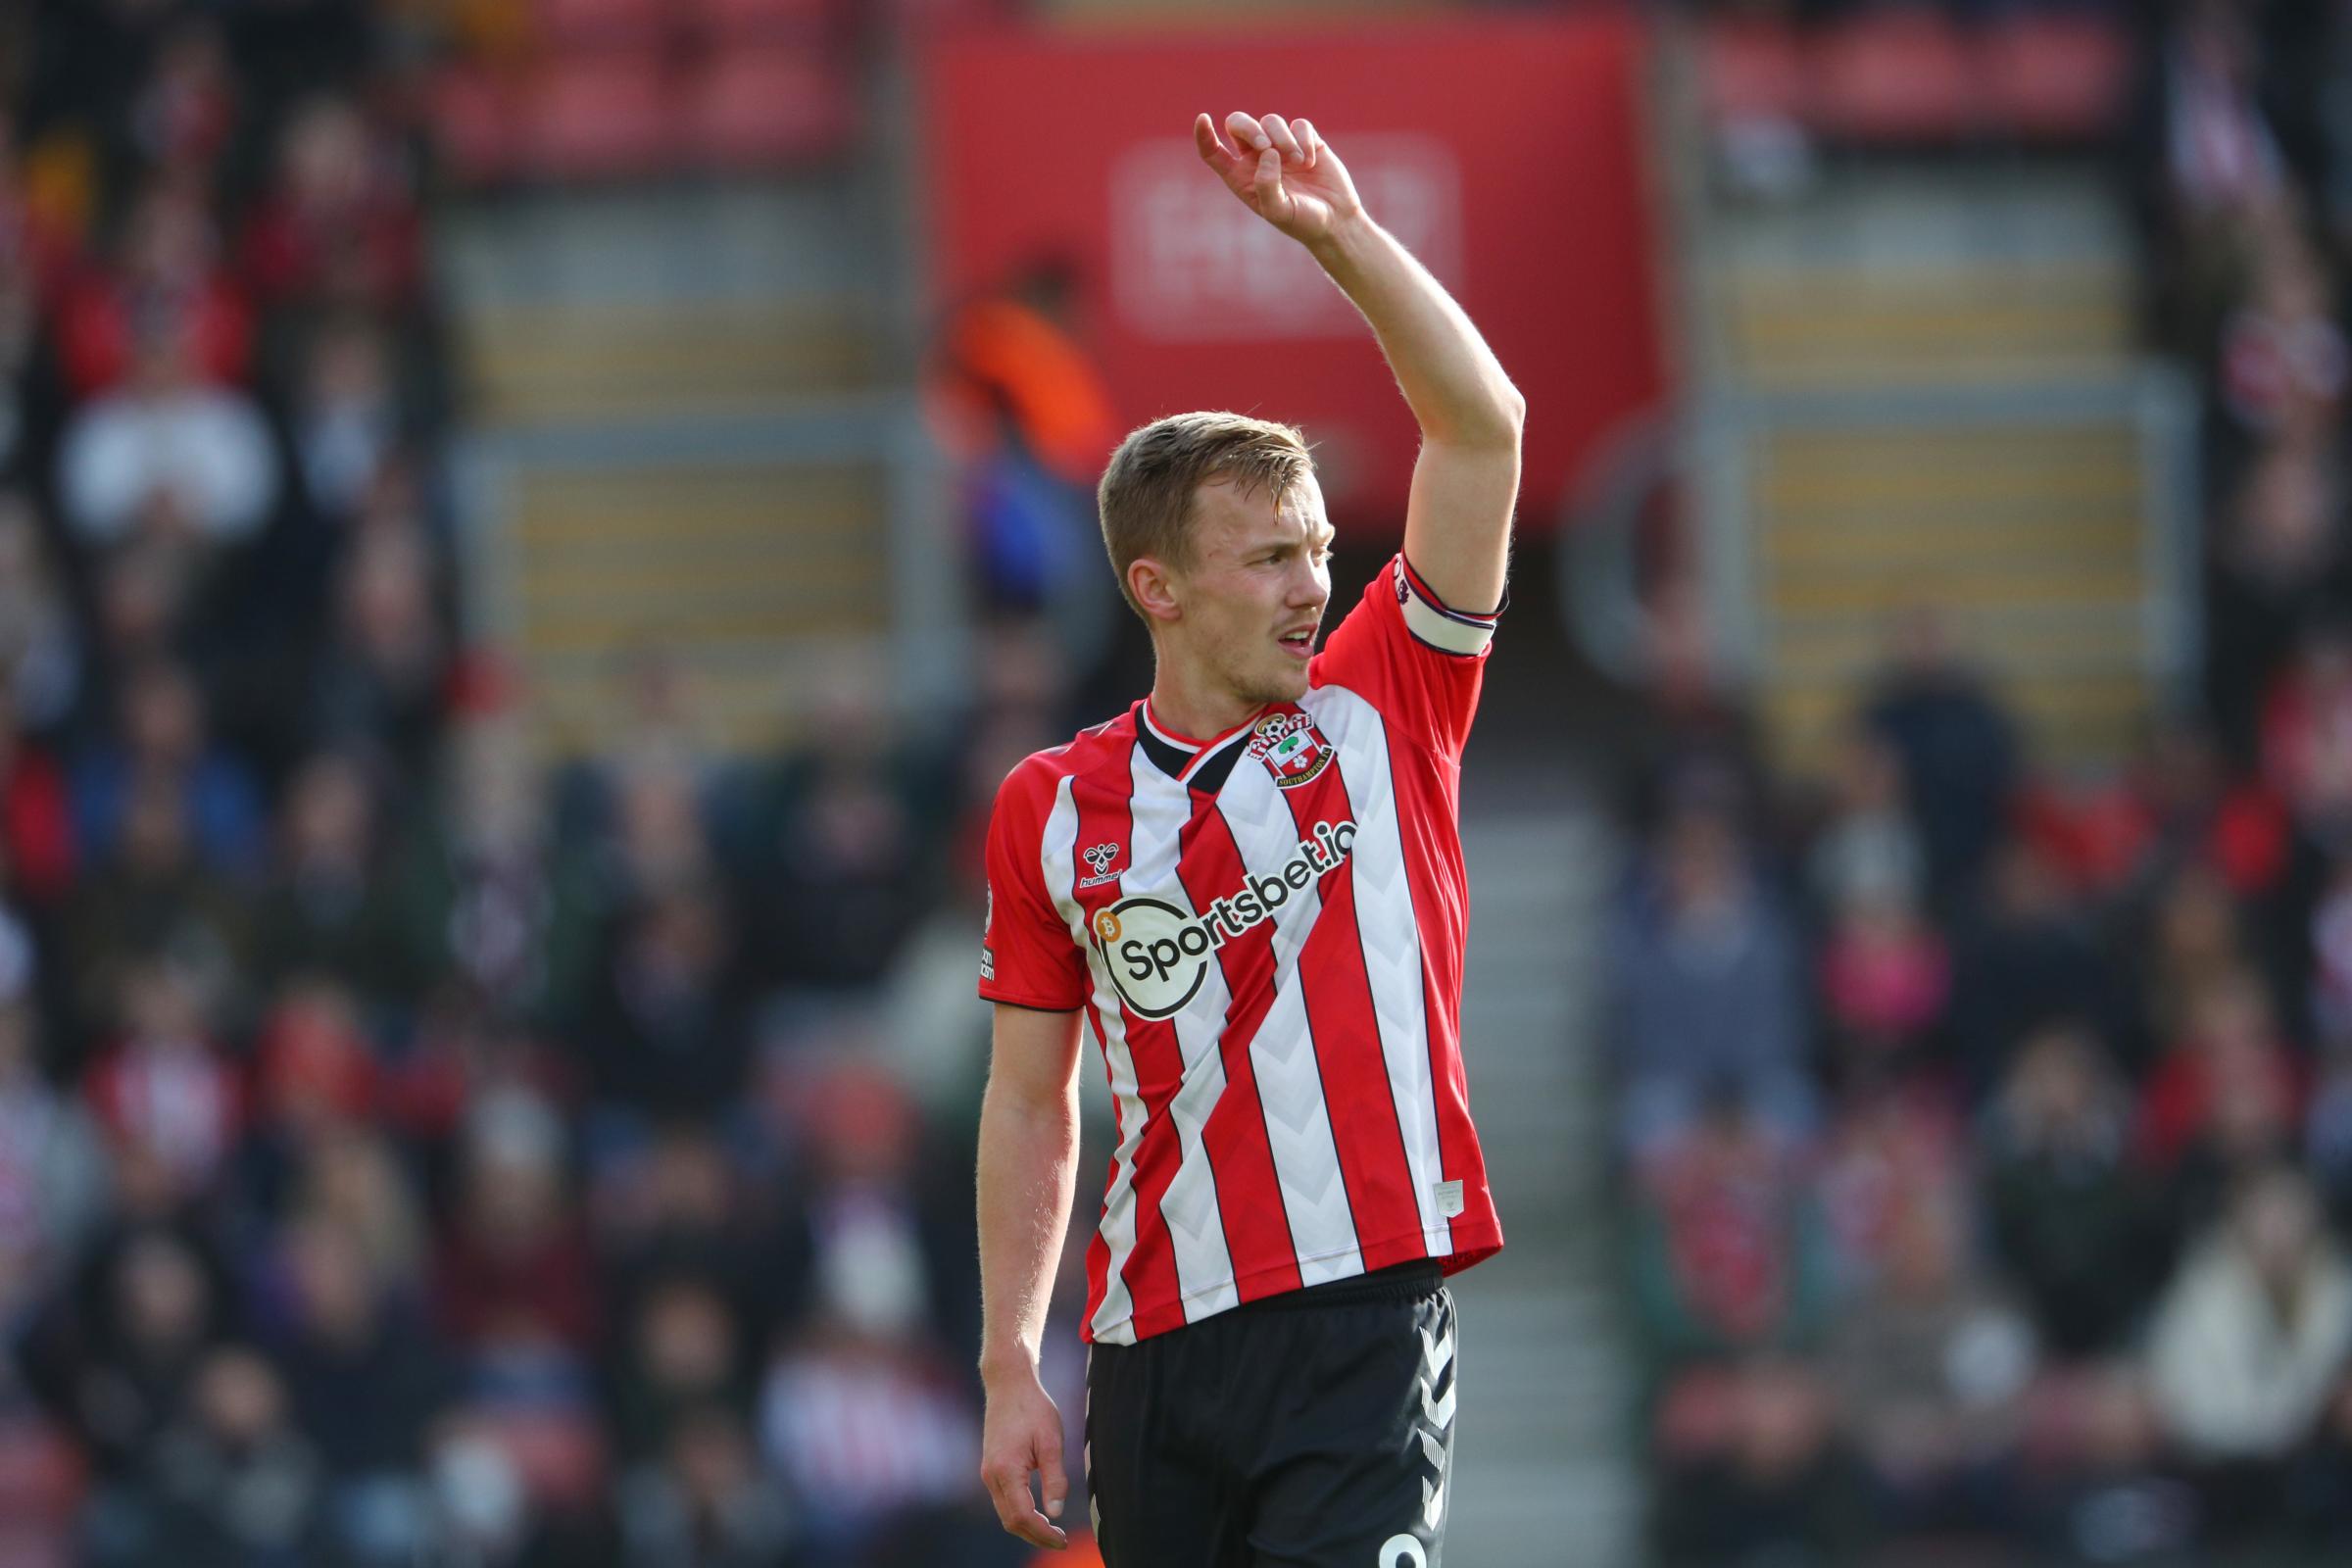 Clubs reportedly quoted £75million asking price for Ward-Prowse